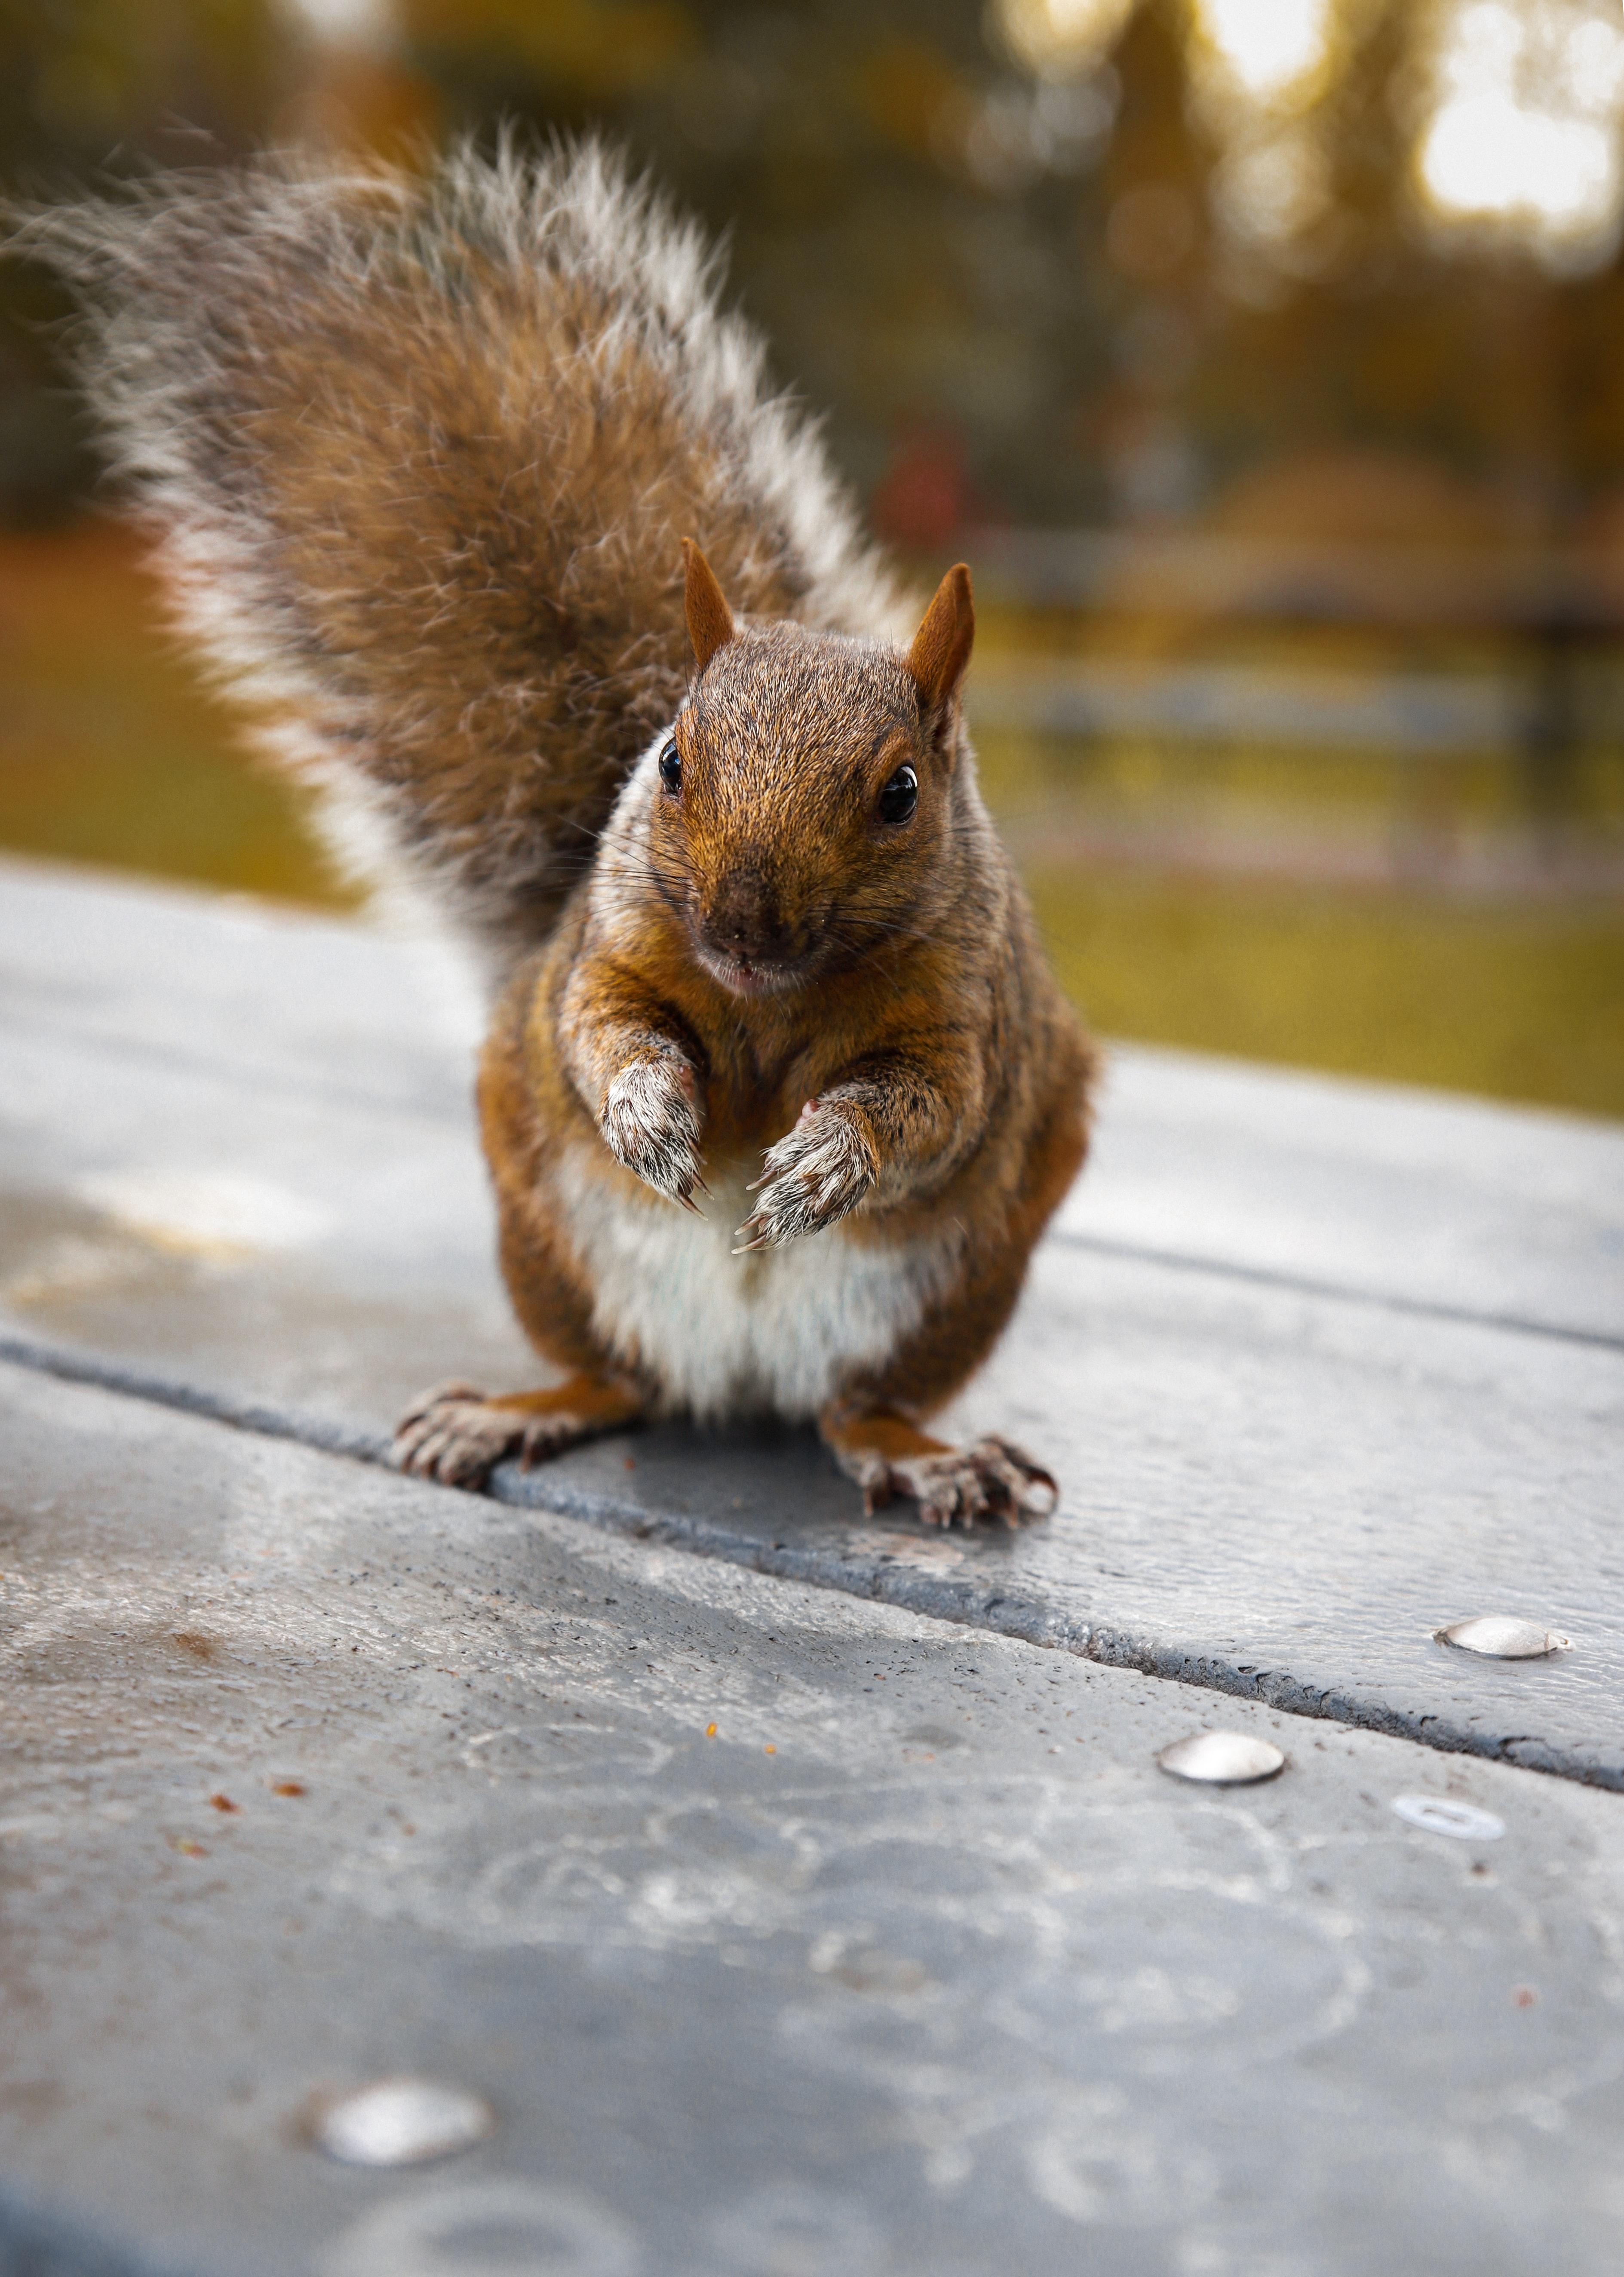 Lock Screen PC Wallpaper funny, animals, squirrel, nice, sweetheart, rodent